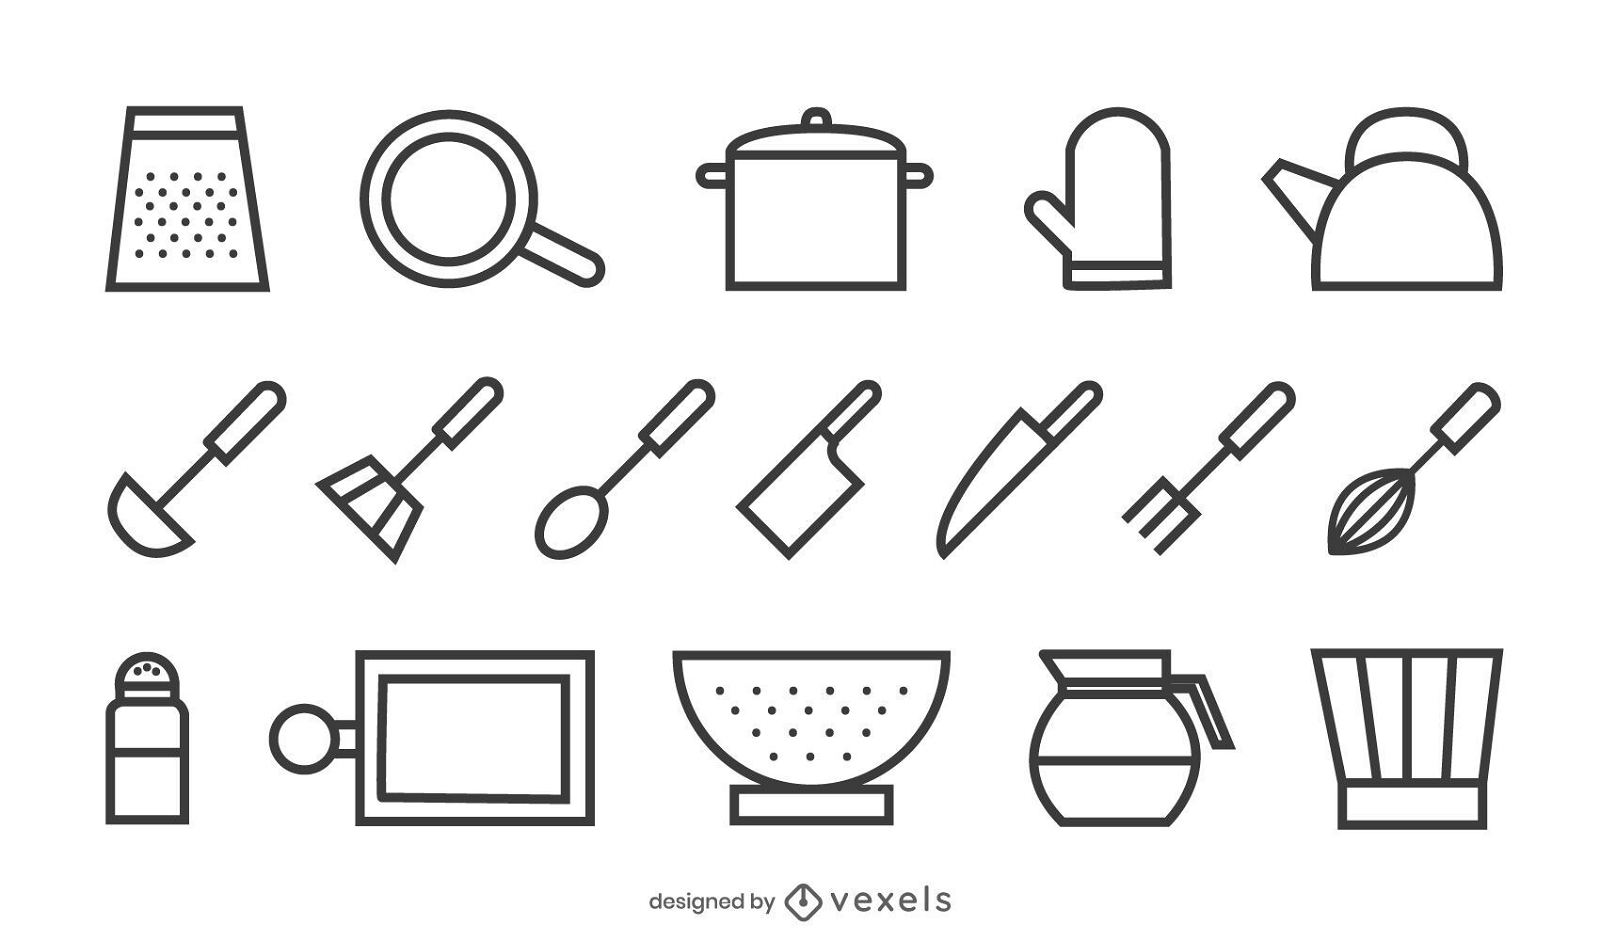 Catalog - Free Tools and utensils icons